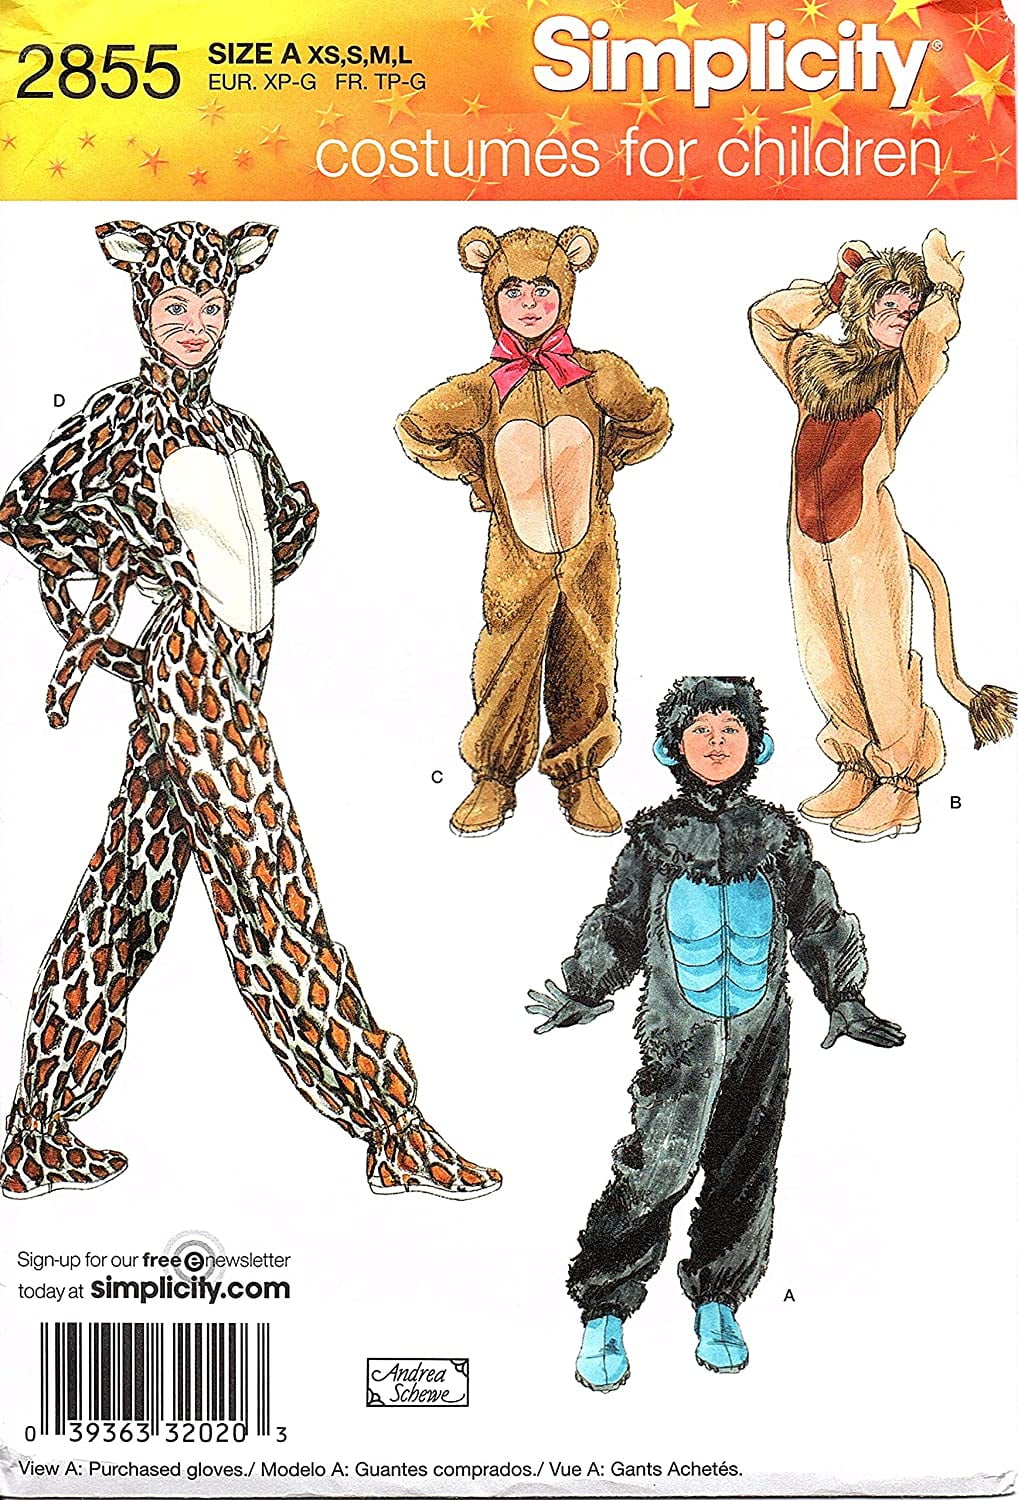 Bear Simplicity 2855 Leopard Gorilla and Lion Sewing Pattern for Boys and Girls Halloween Costumes Sizes XS-L 